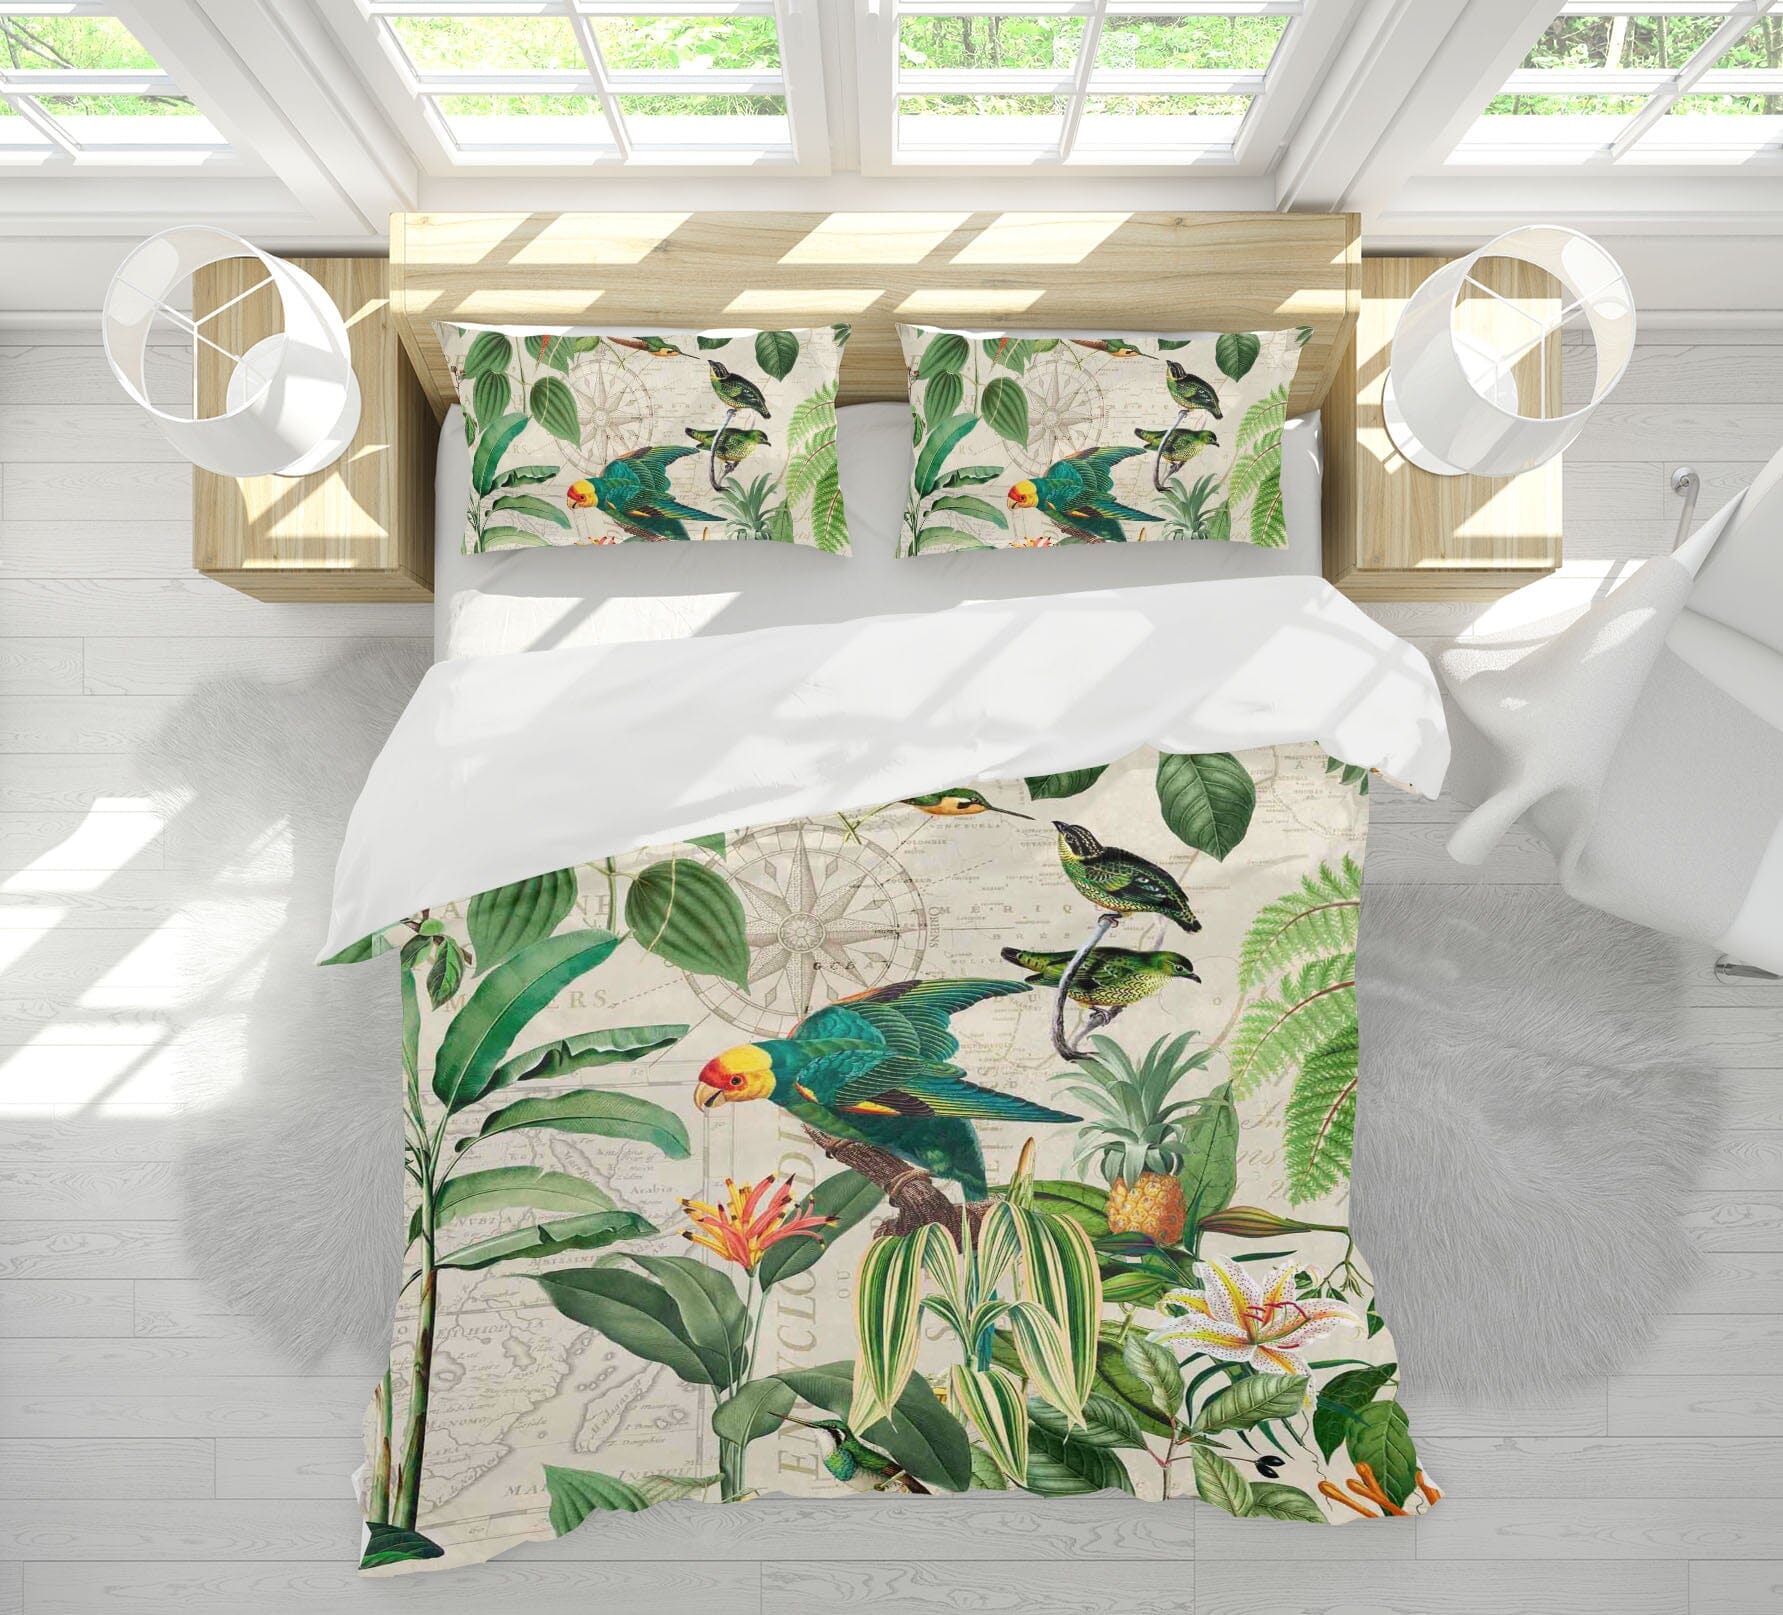 3D Kingdom Of Birds 2133 Andrea haase Bedding Bed Pillowcases Quilt Quiet Covers AJ Creativity Home 